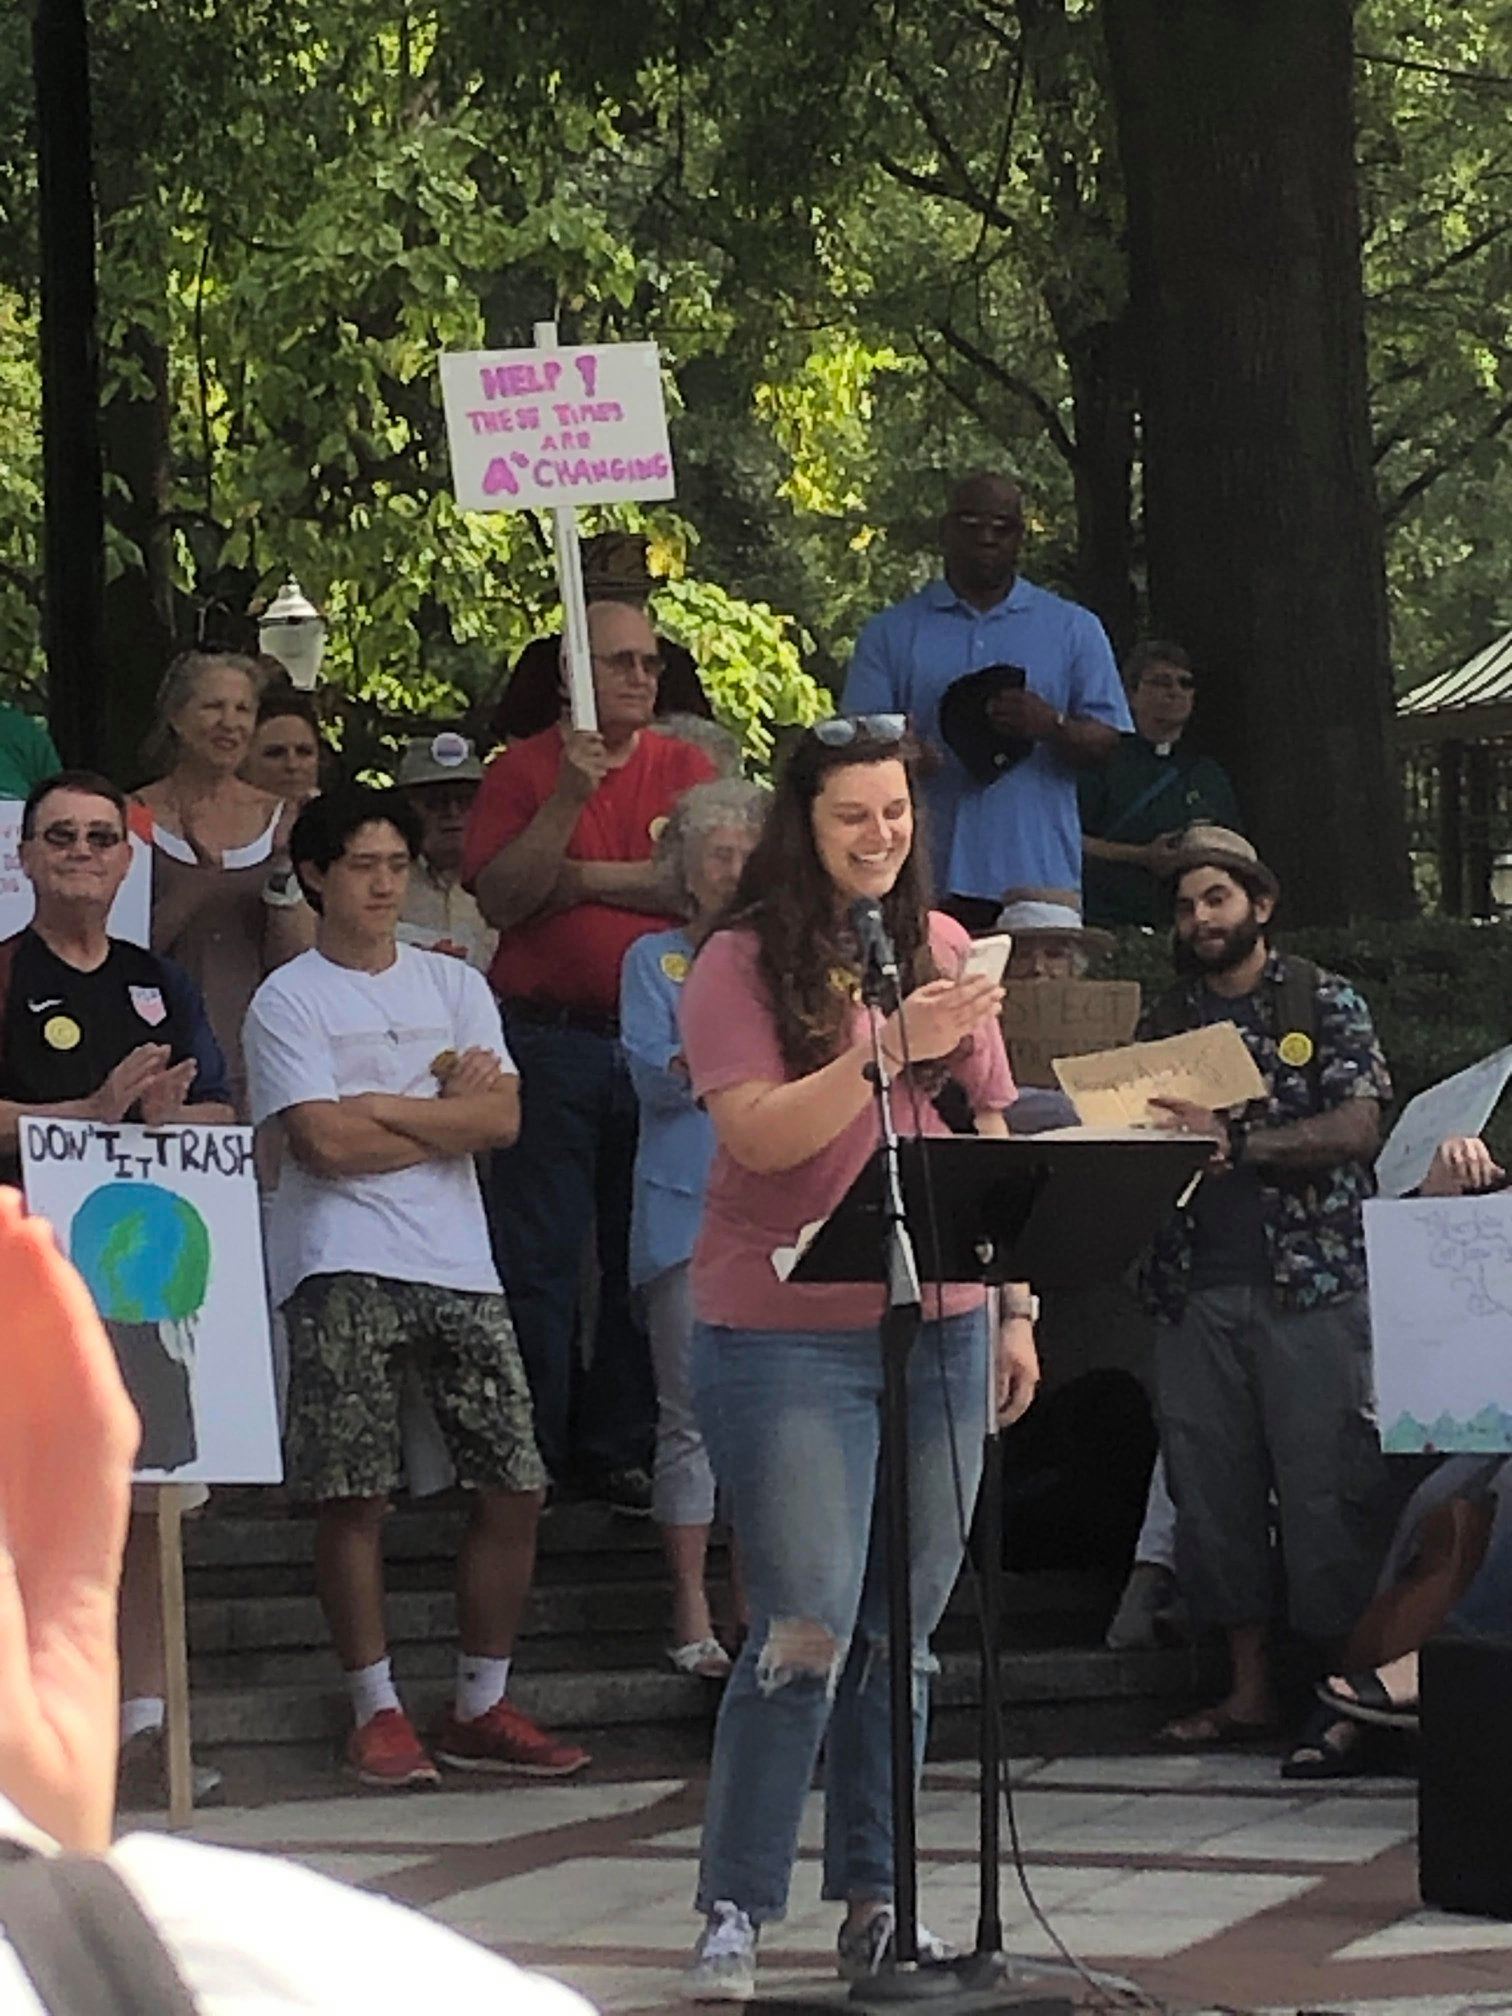 ARA Junior Board member, Laura Quattrochi, shares her thoughts on the Climate Crisis to the crowd gathered in Linn Park in Birmingham — with Laura Quattrochi.